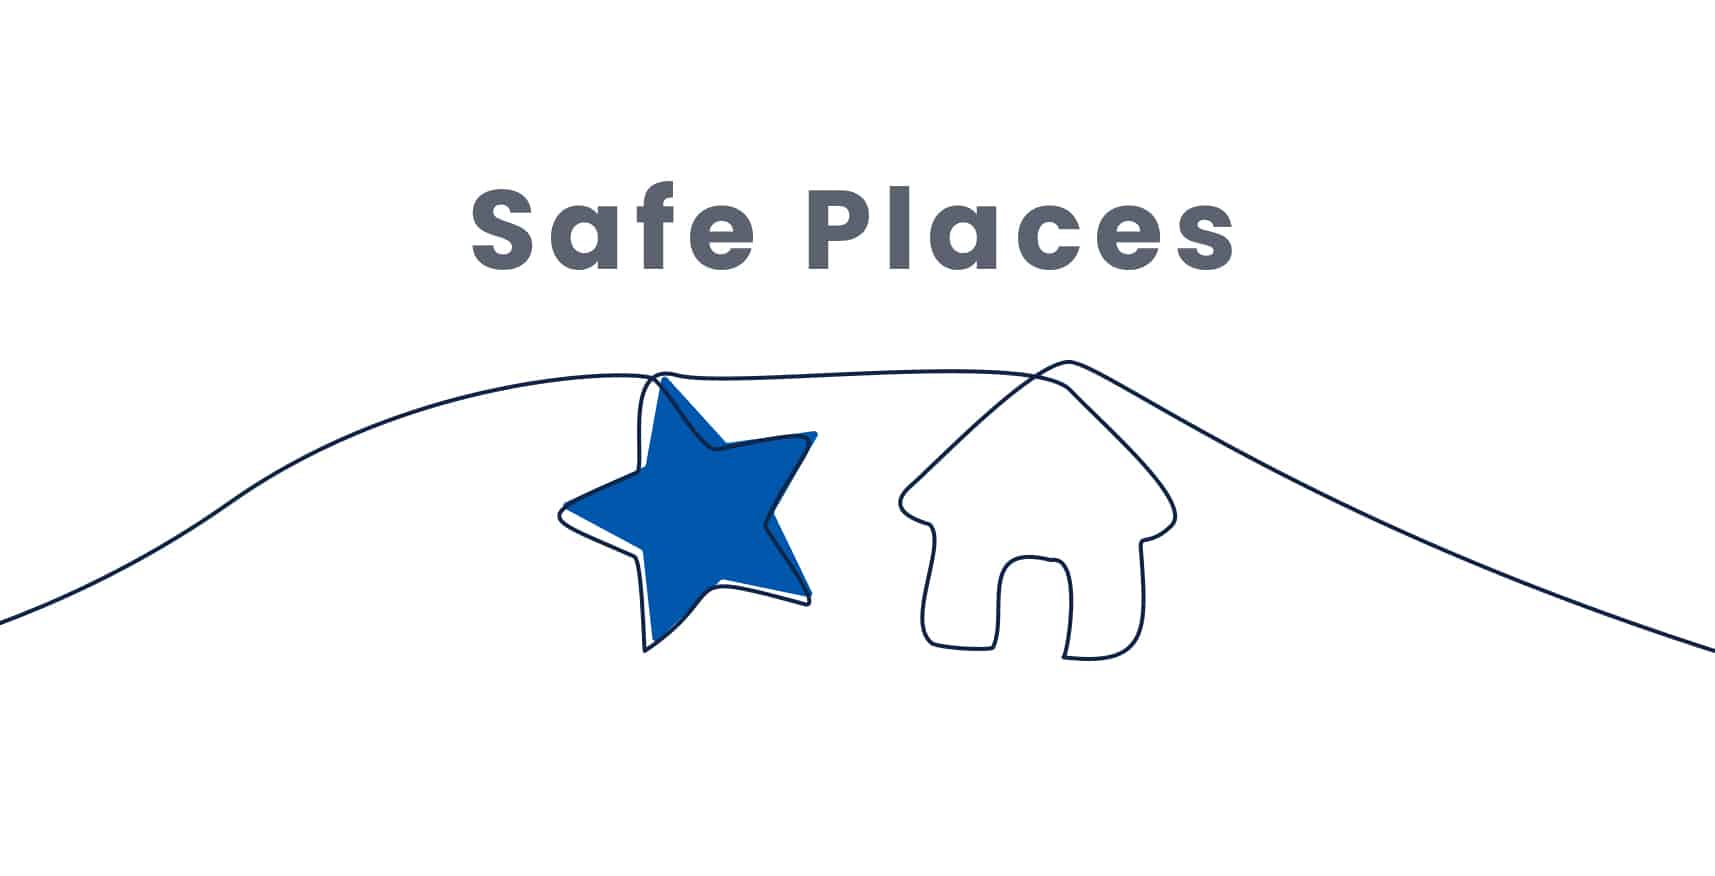 Outline of a star and house with the text "Safe Places" above them against a white background.